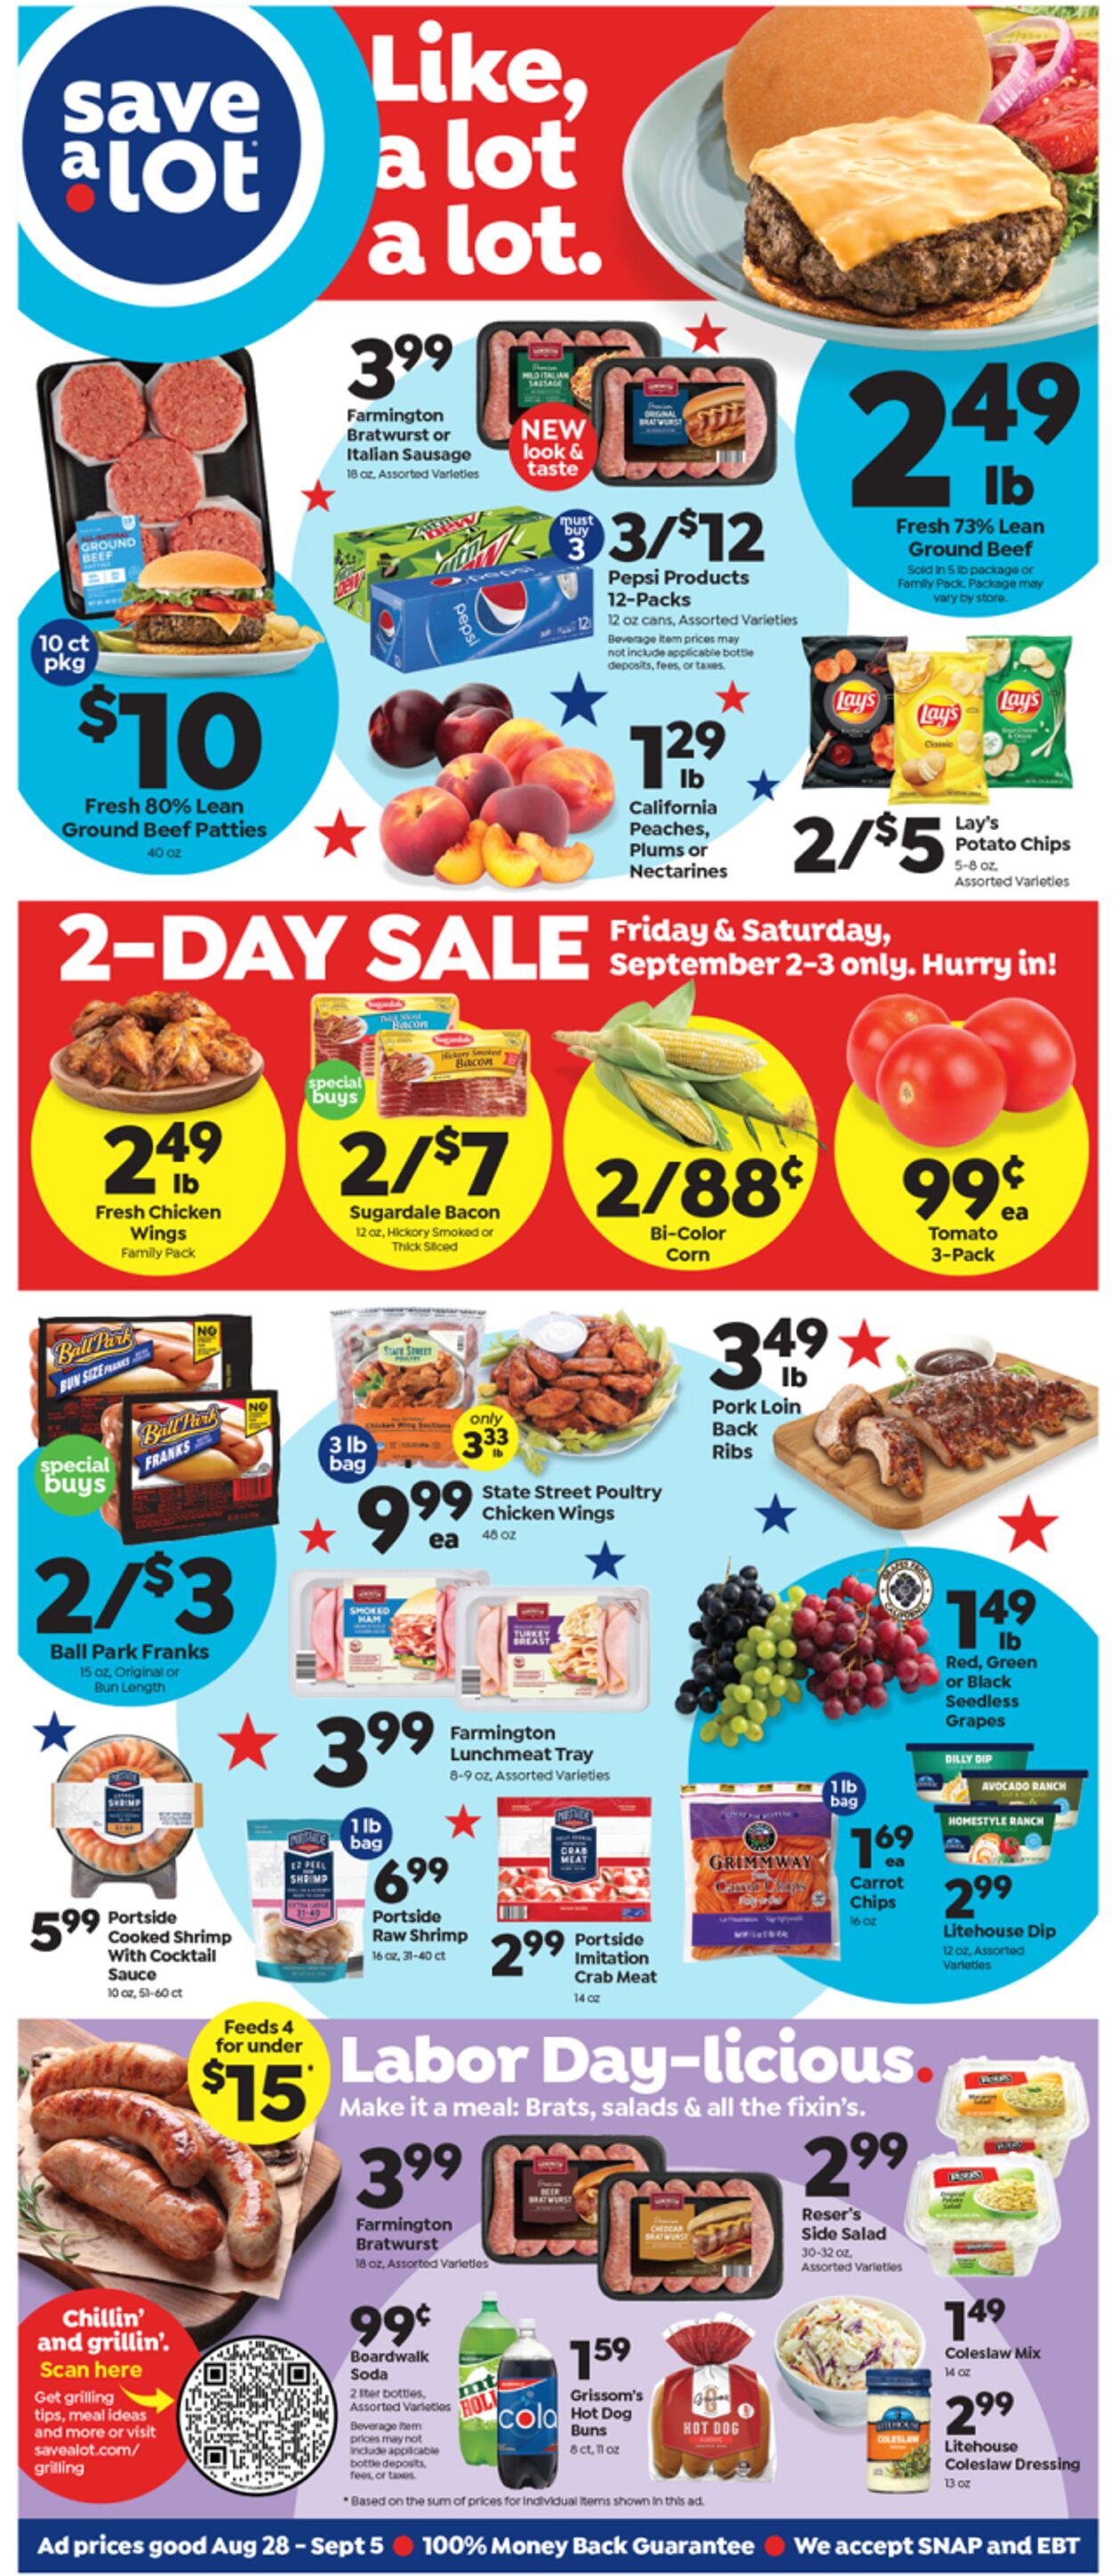 Weekly ad Save a Lot 08/28/2022 - 09/05/2022